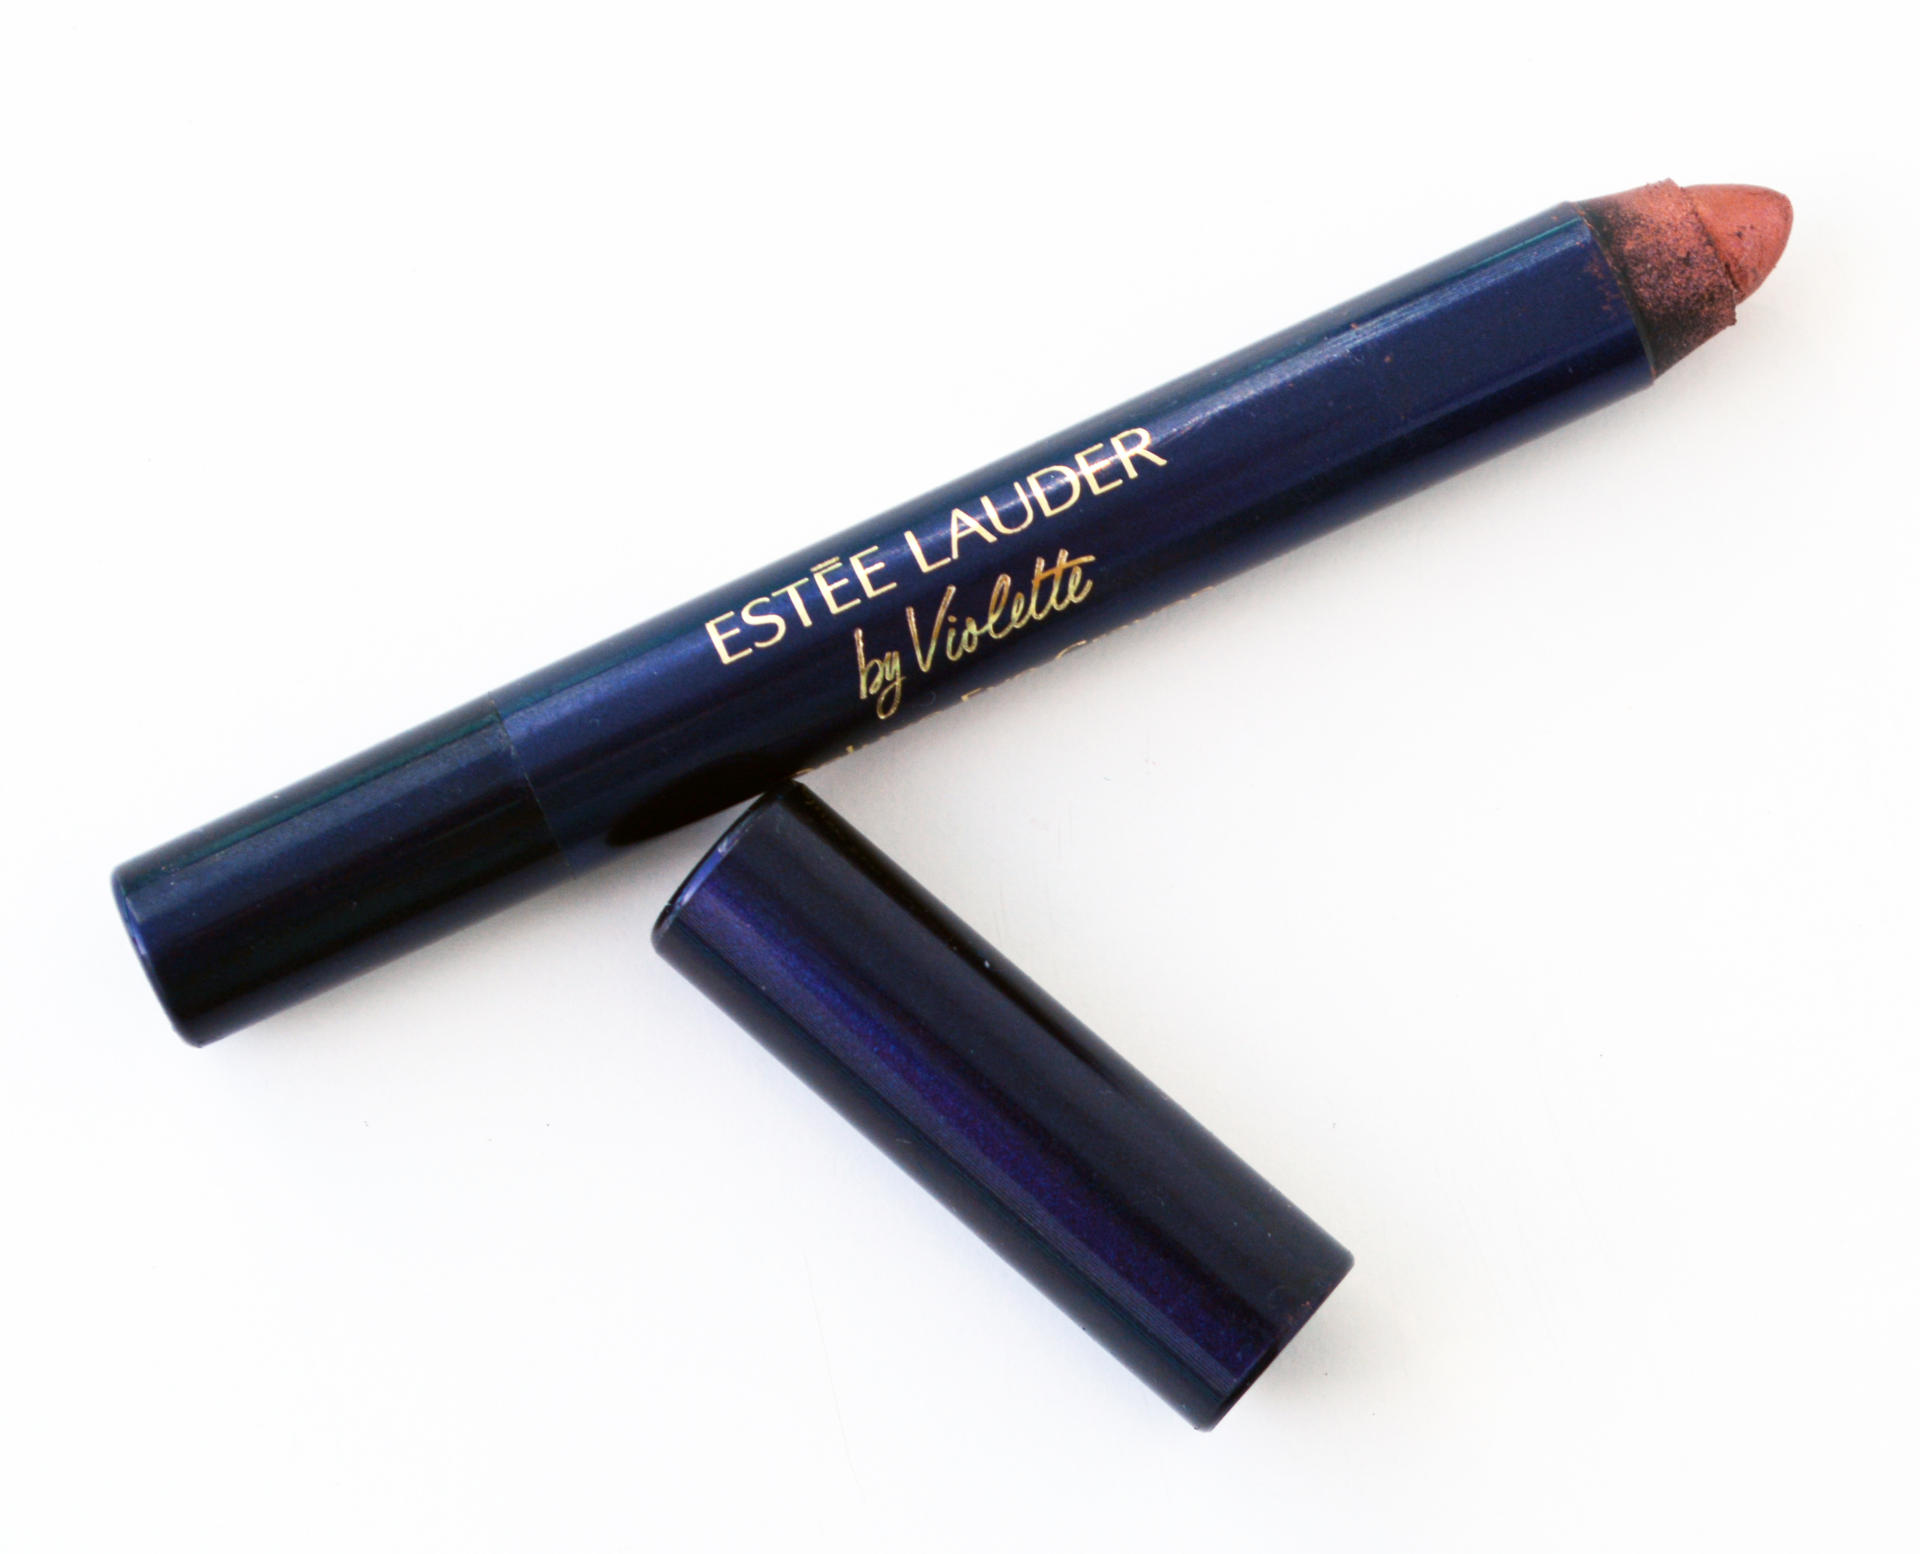 Estee Lauder By Violette Deluxe Eye Crayon Sly & Sultry